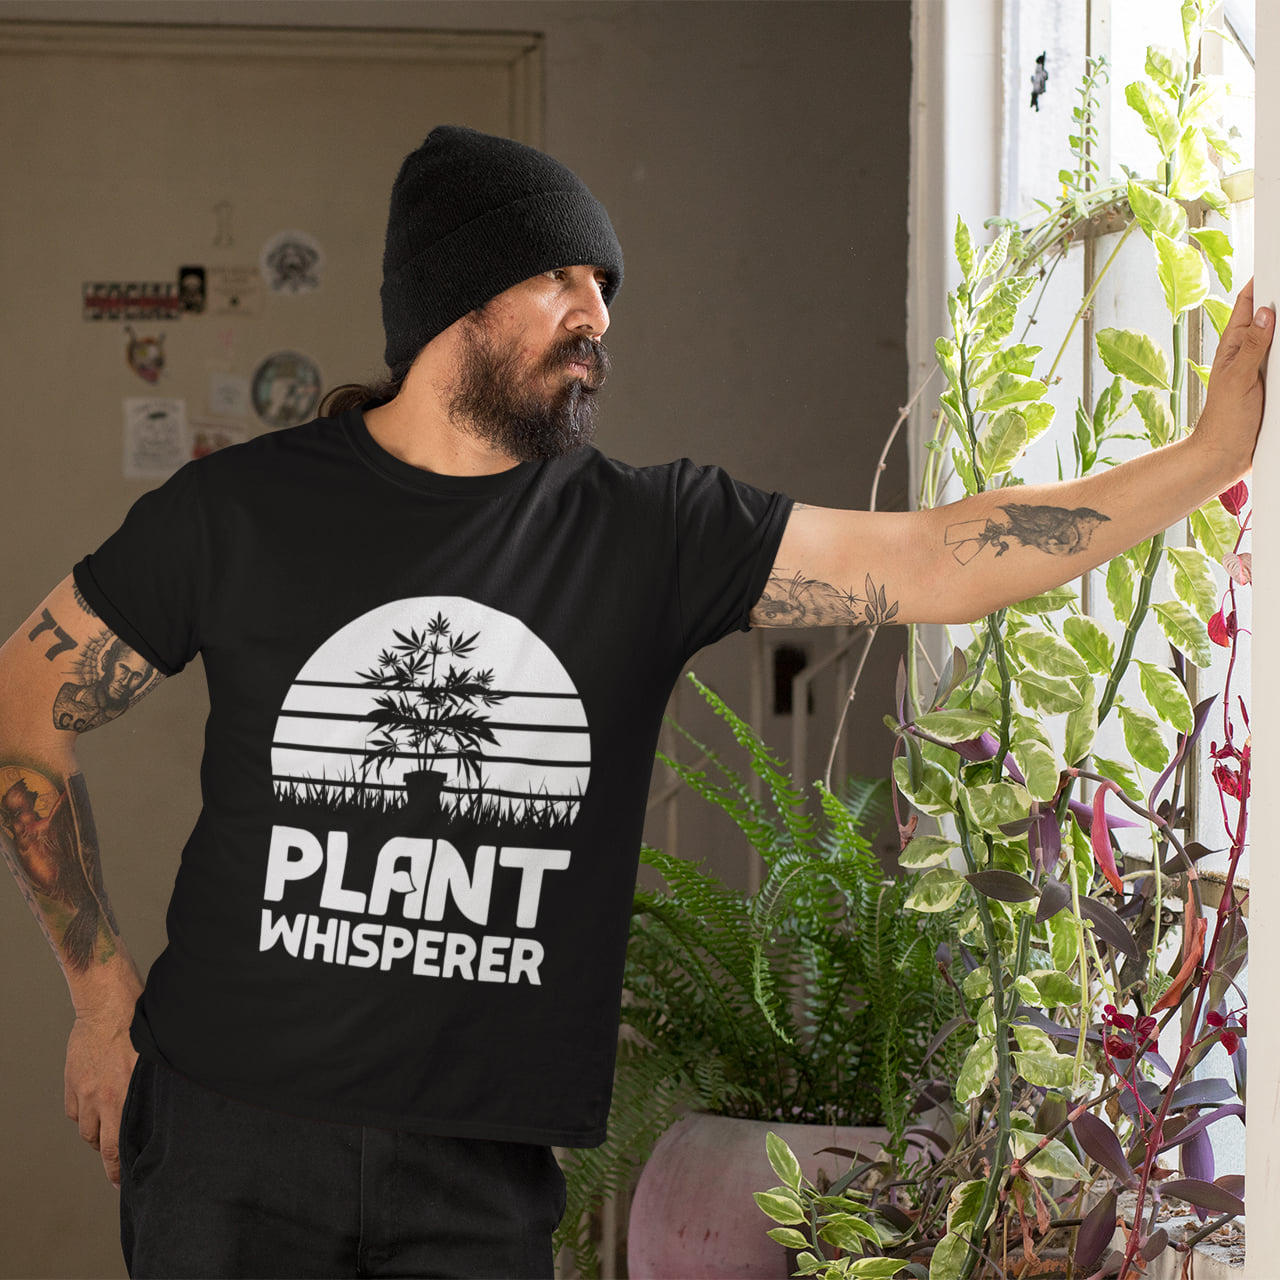 Plant whisperer - Plant canabis